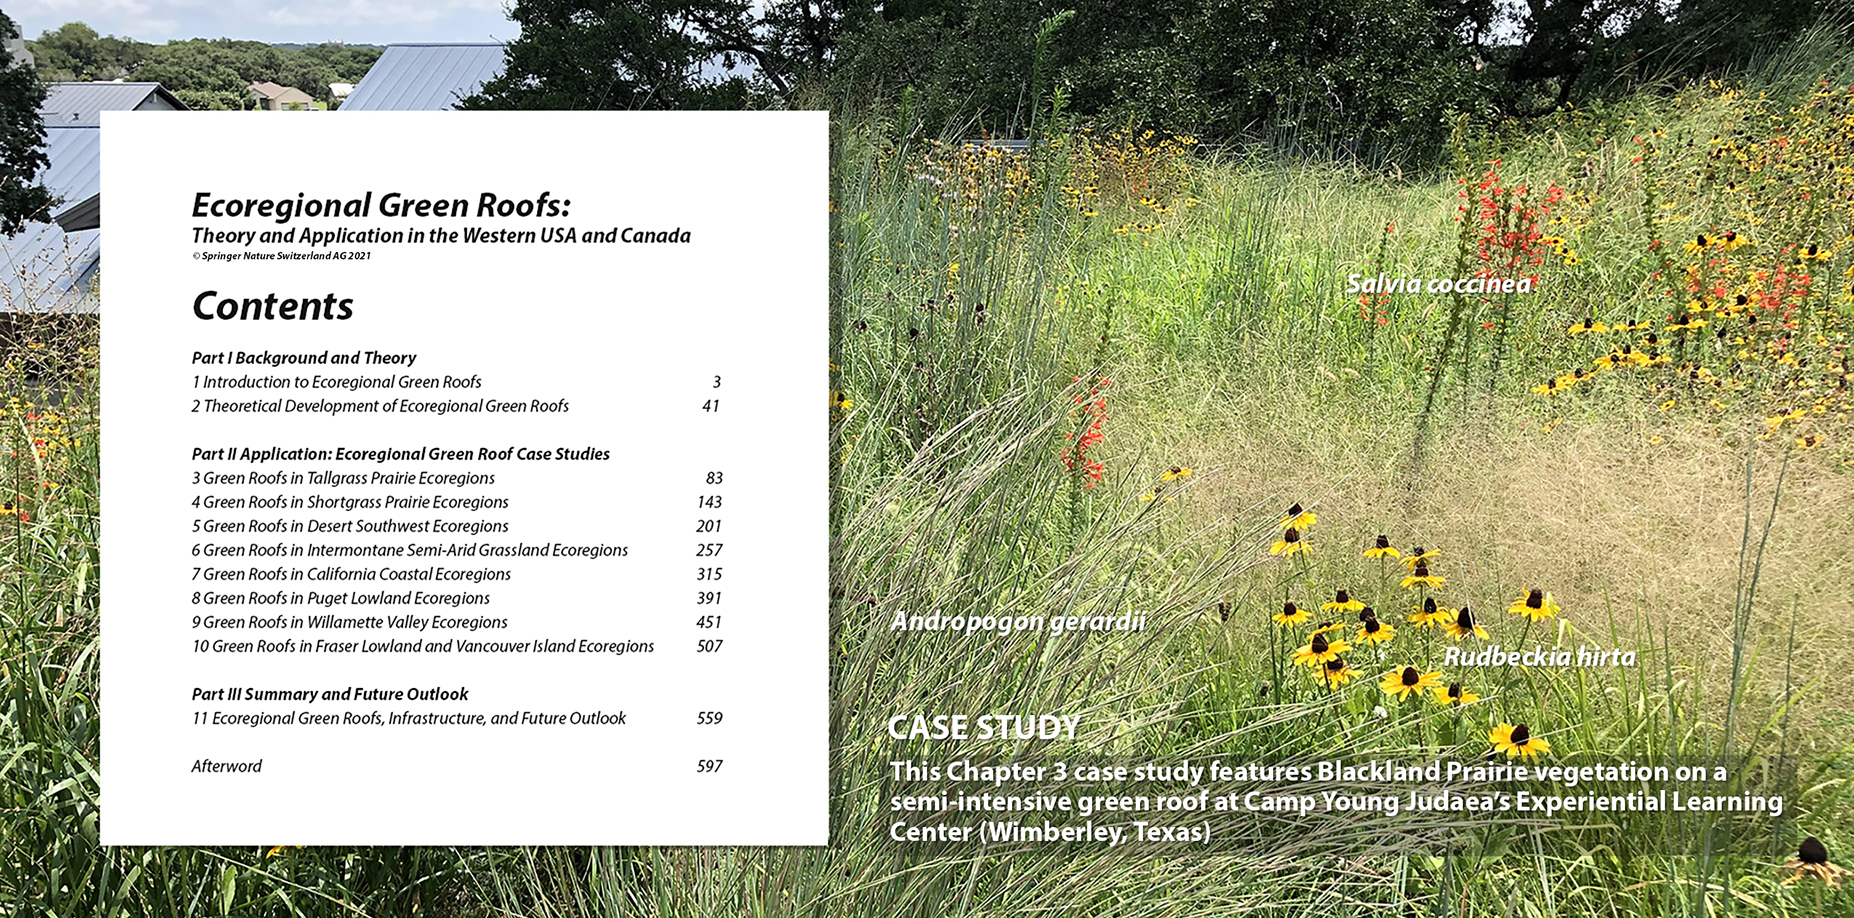 Table of Contents and a Green Roof with Blackland Prairie Vegetation (Chapter 3)